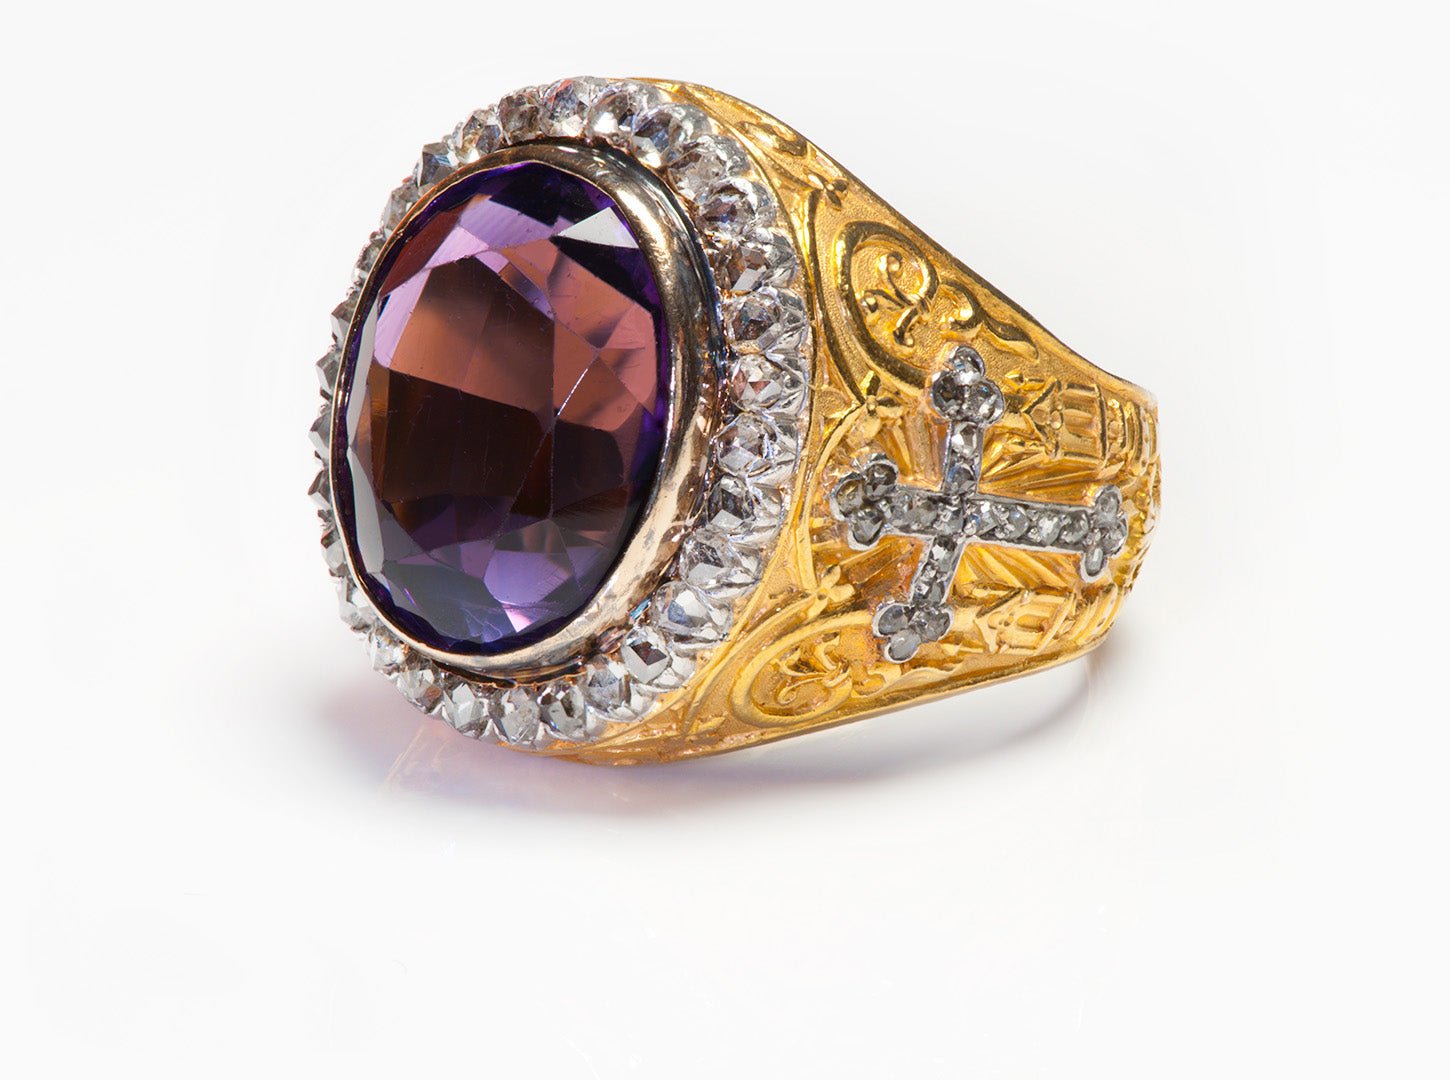 Antique Amethyst Diamond 18K Gold Bishop Ring - DSF Antique Jewelry